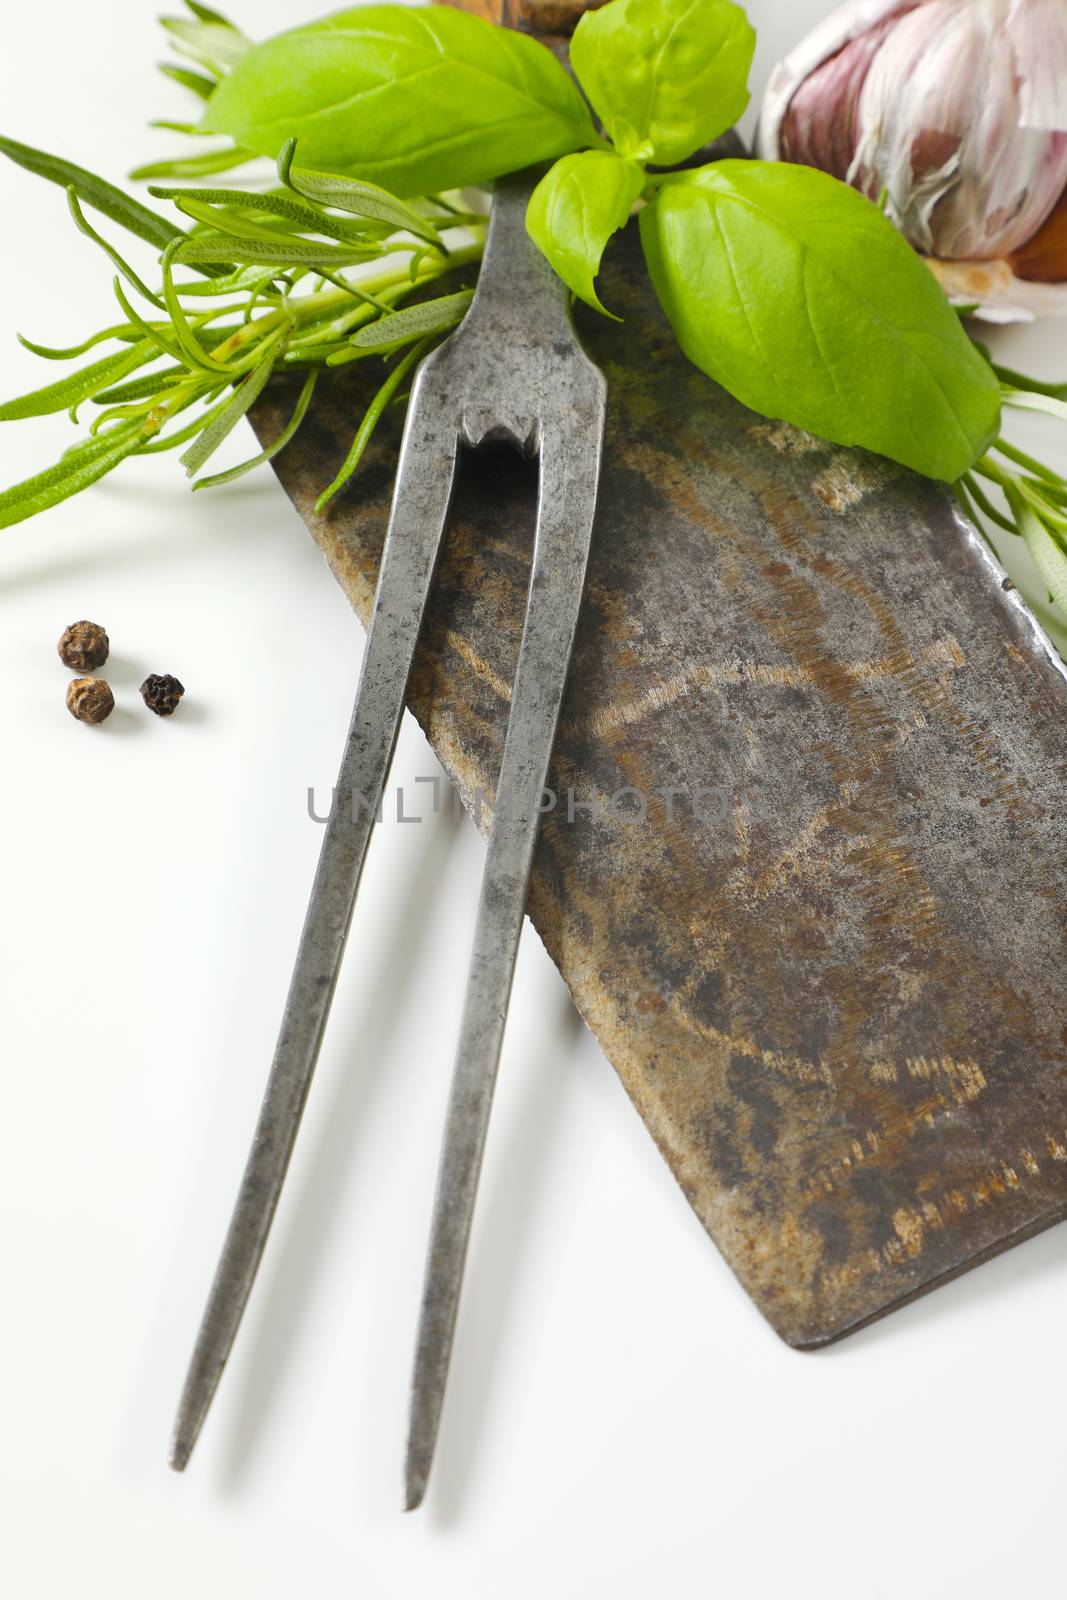 Vintage meat cleaver knife, carving fork, fresh culinary herbs, garlic and peppercorns